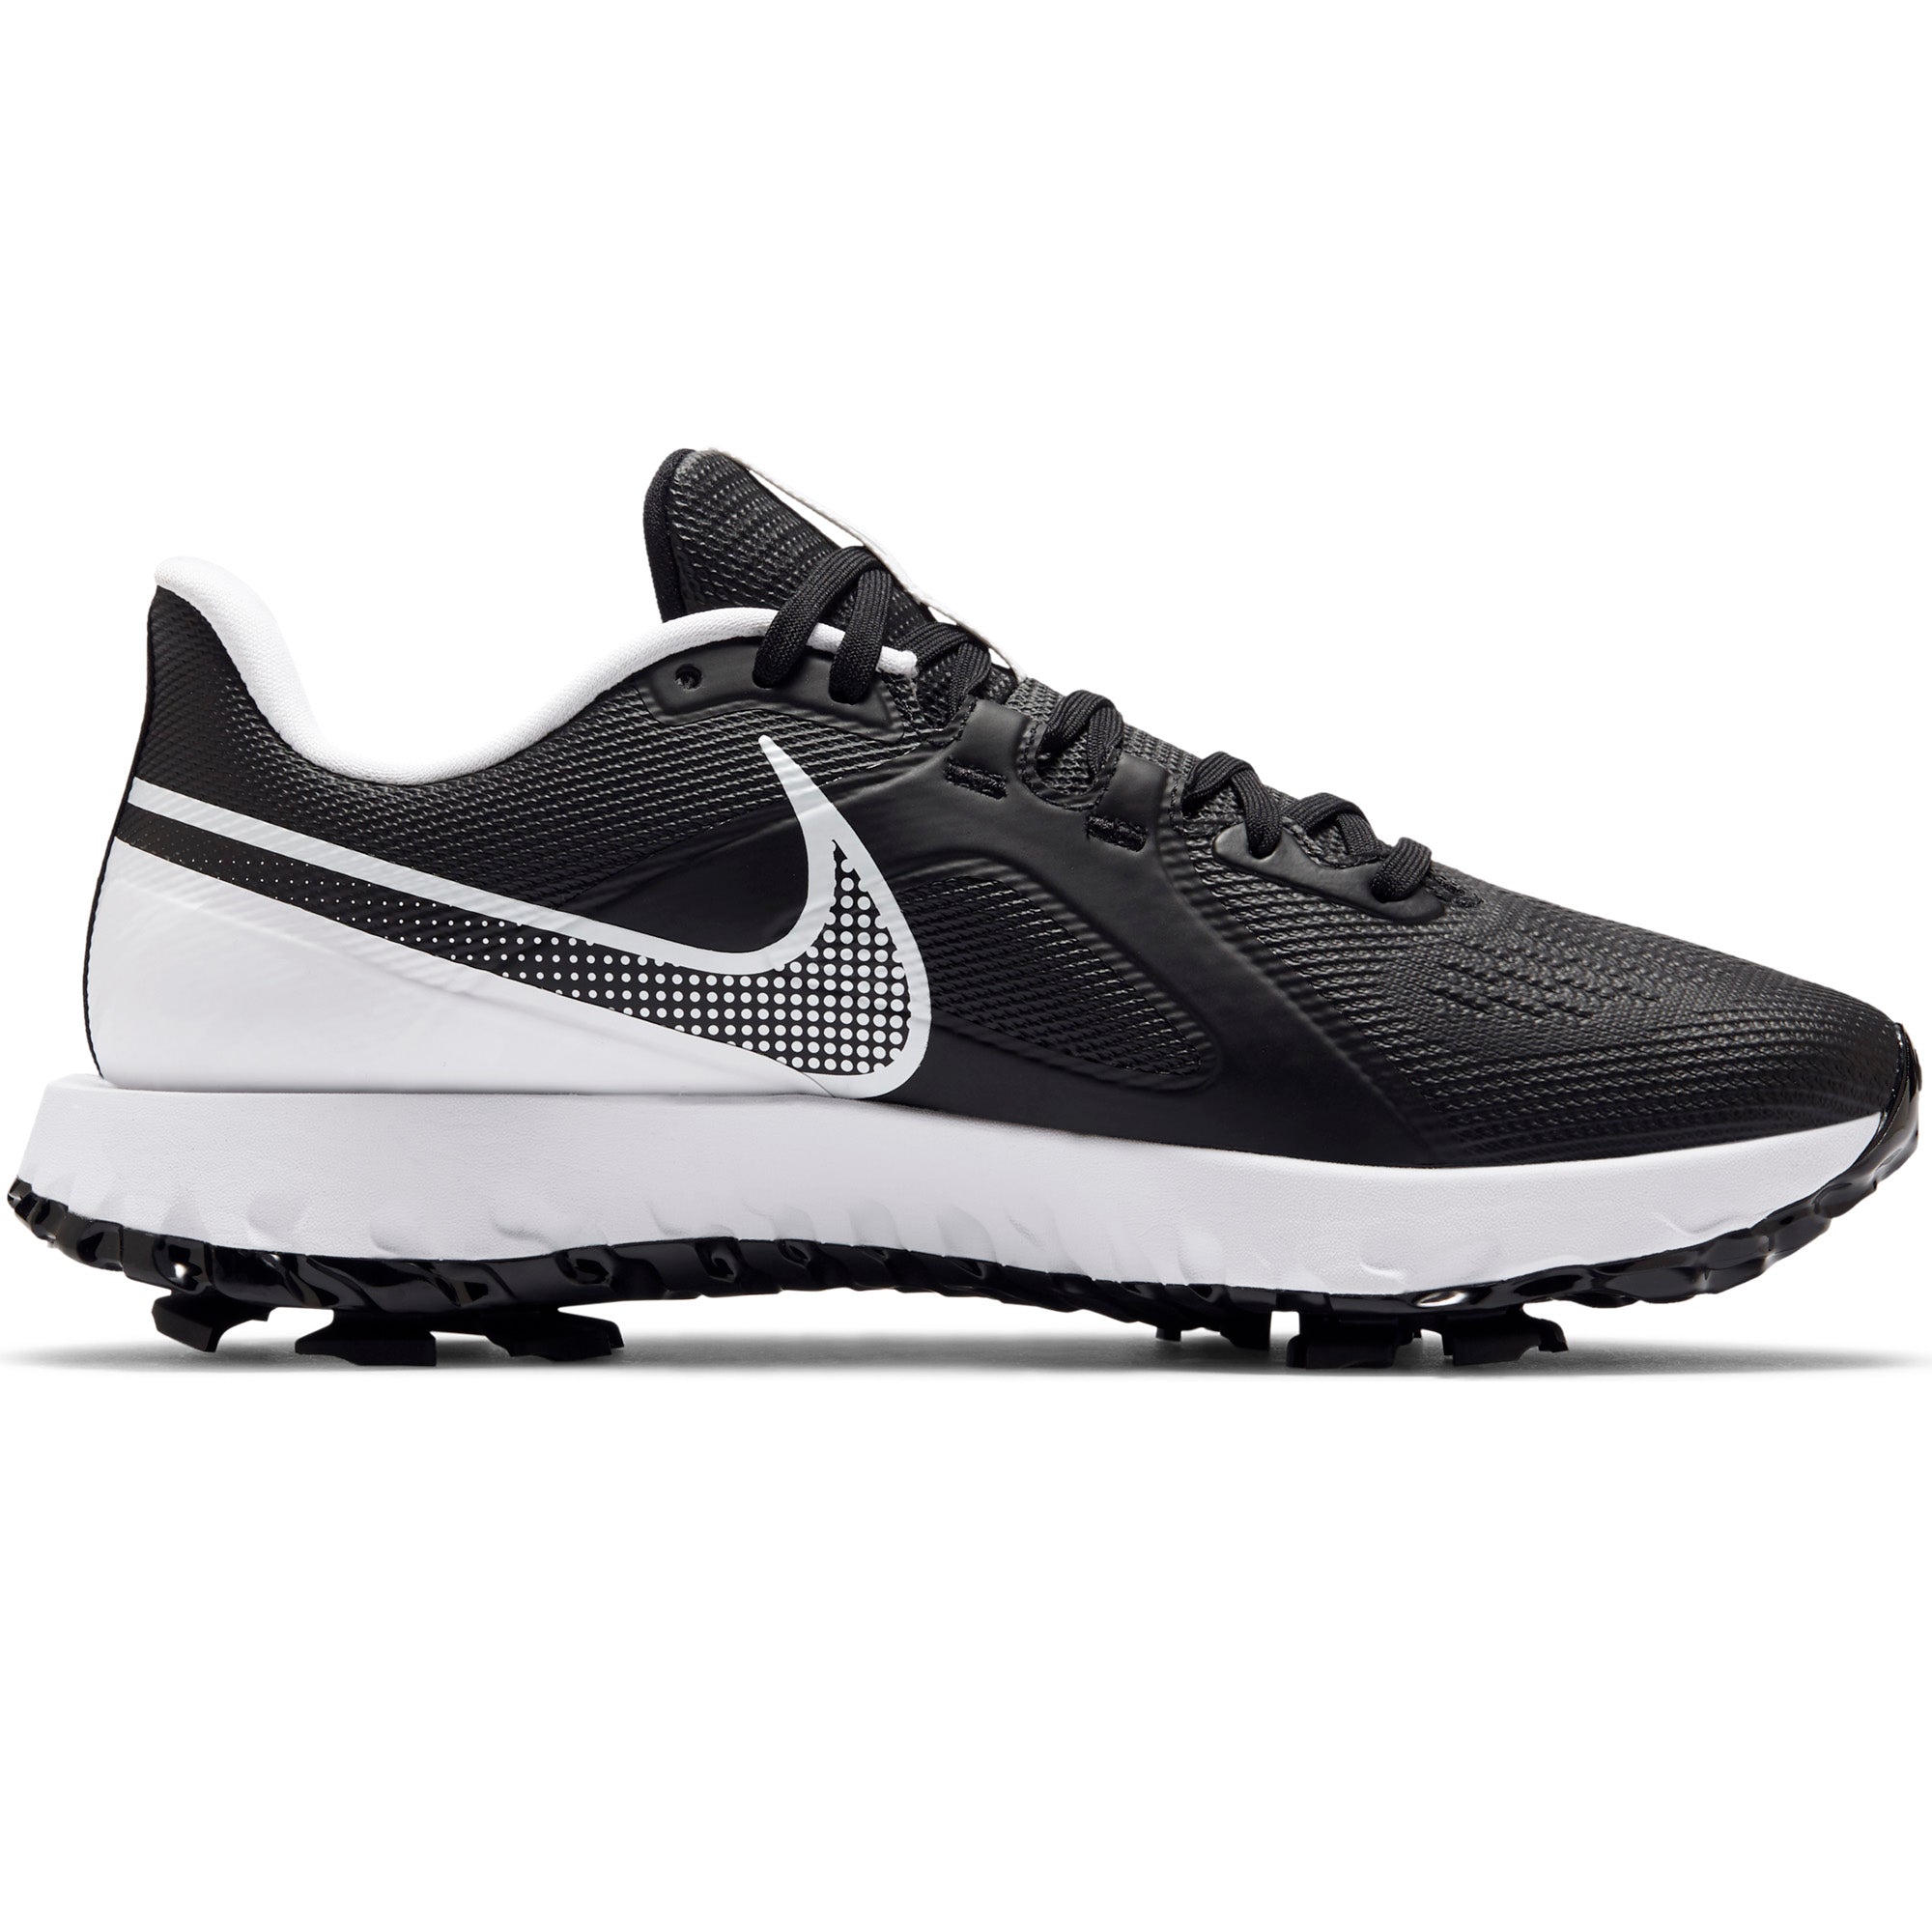 Nike Golf React Infinity Pro Shoes CT6620 Black White 003 | Function18